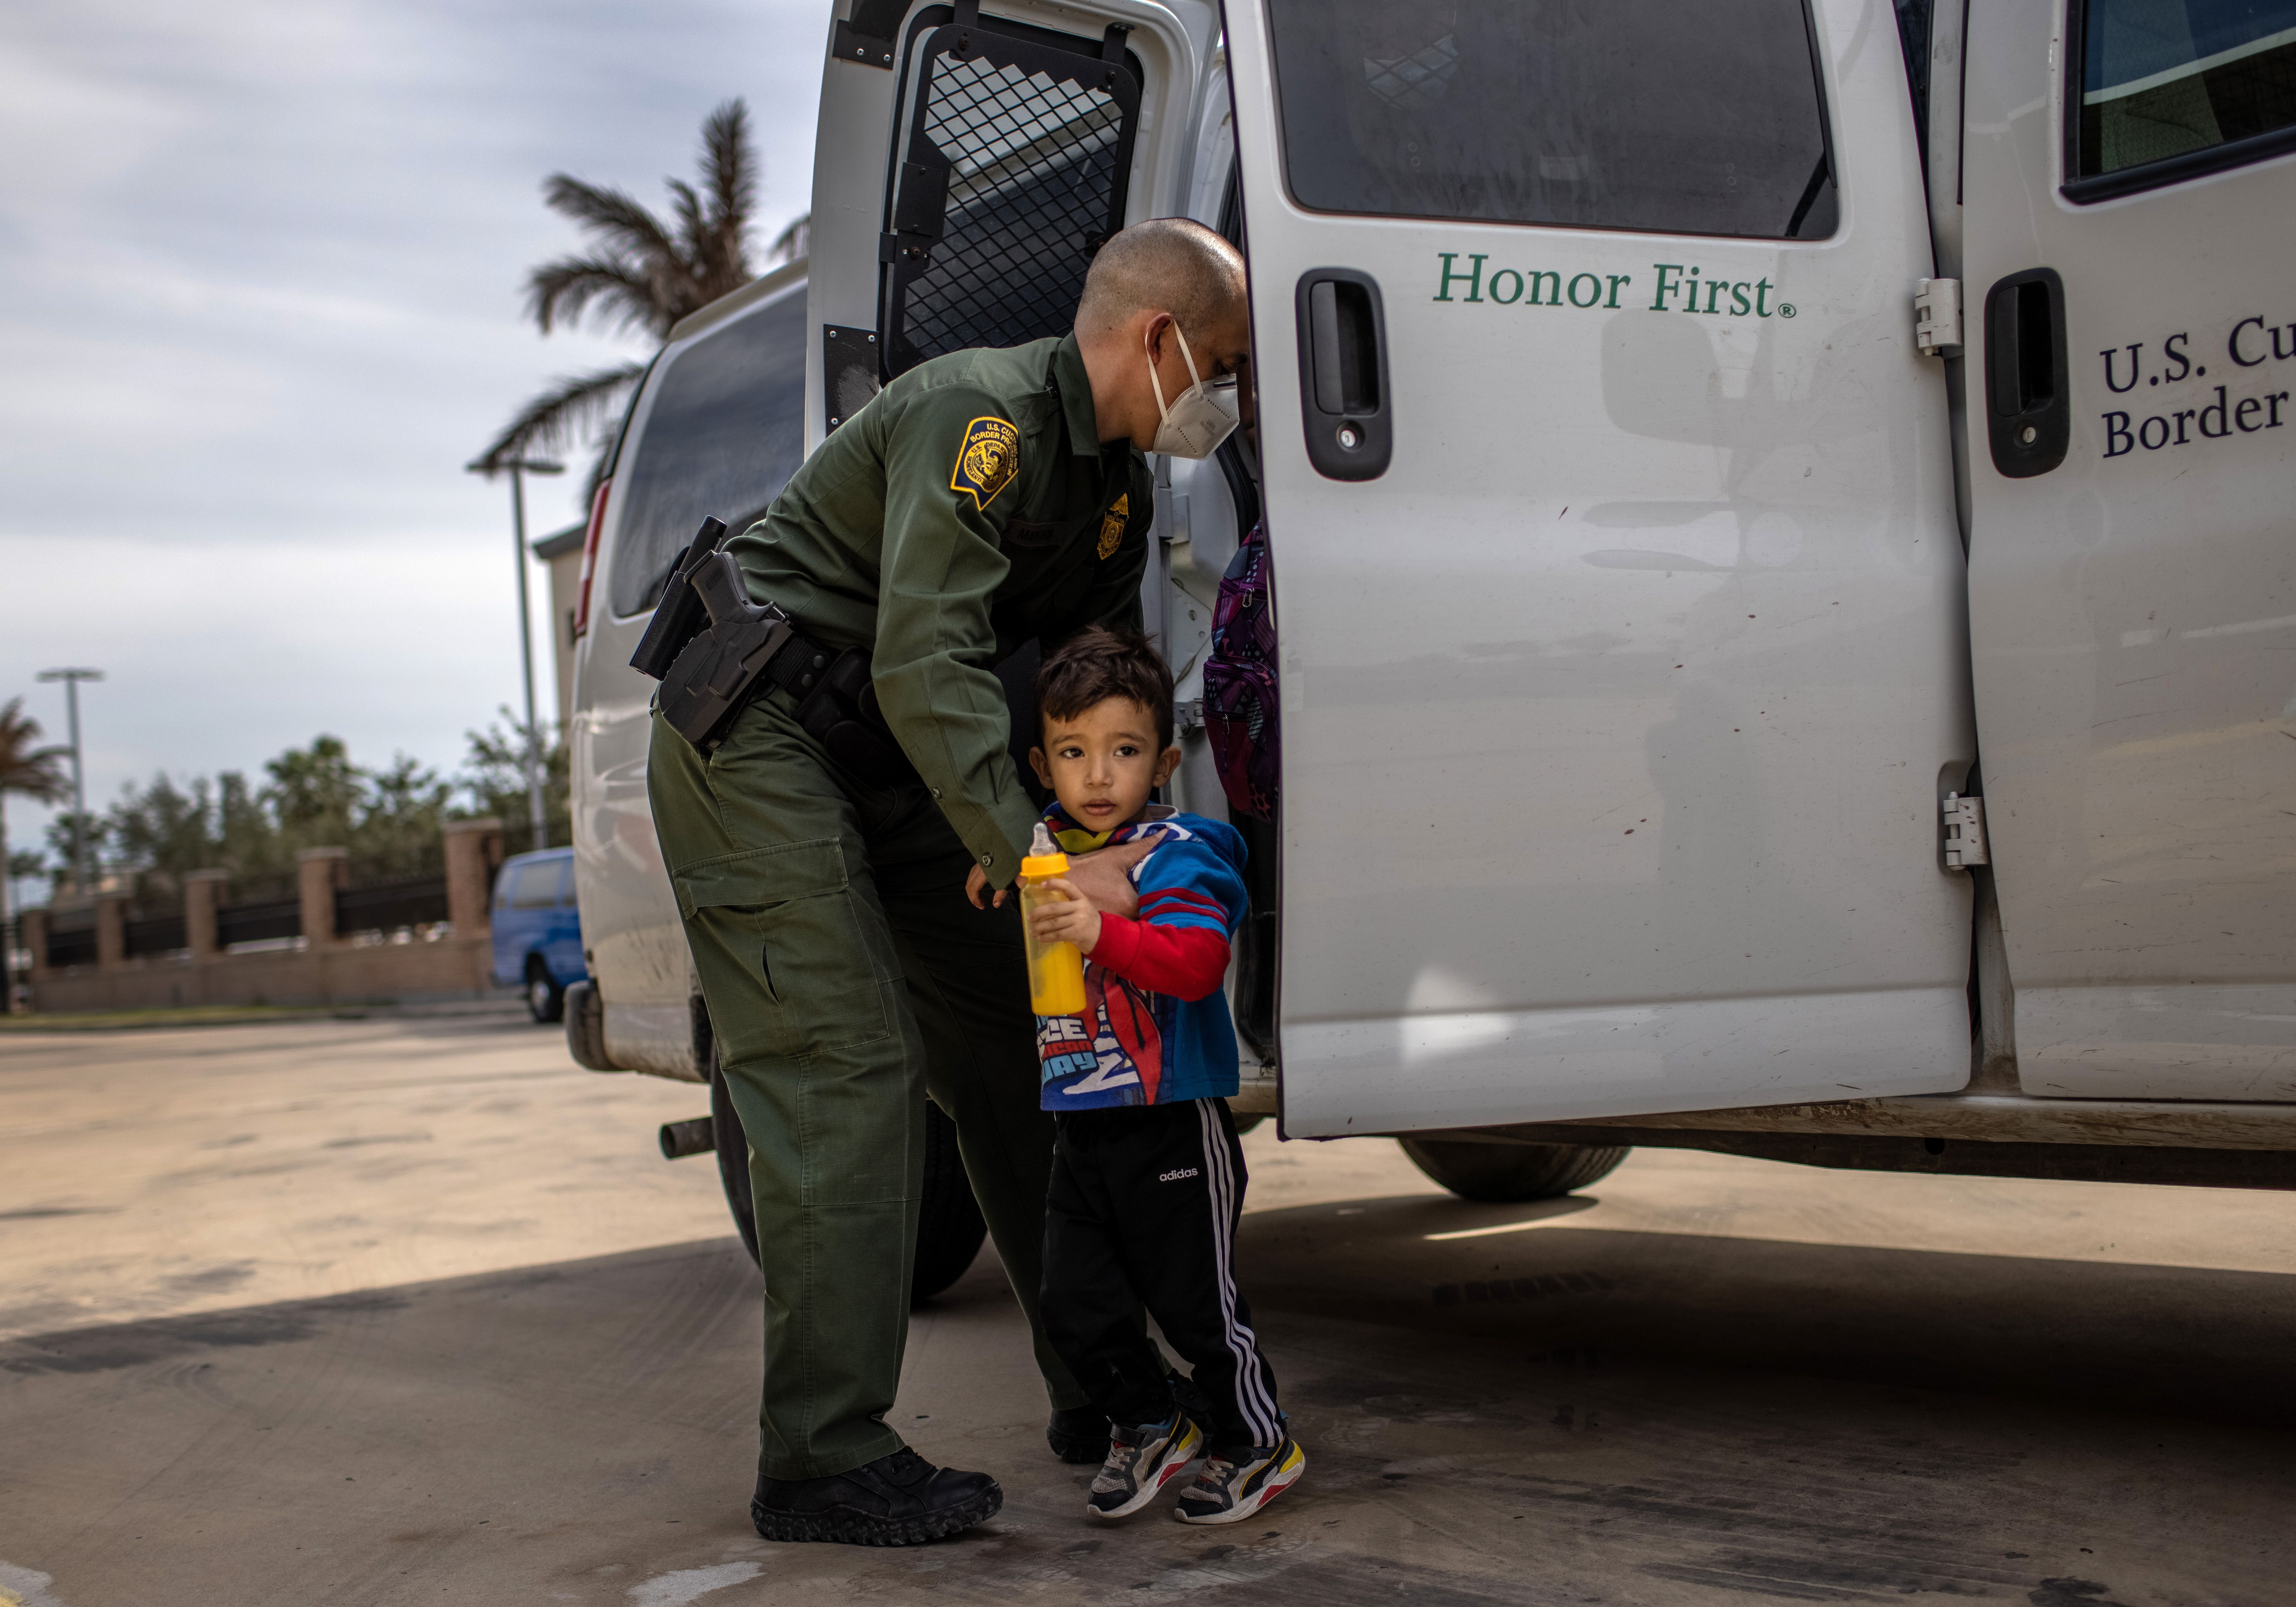 A Border Patrol officer with a child.